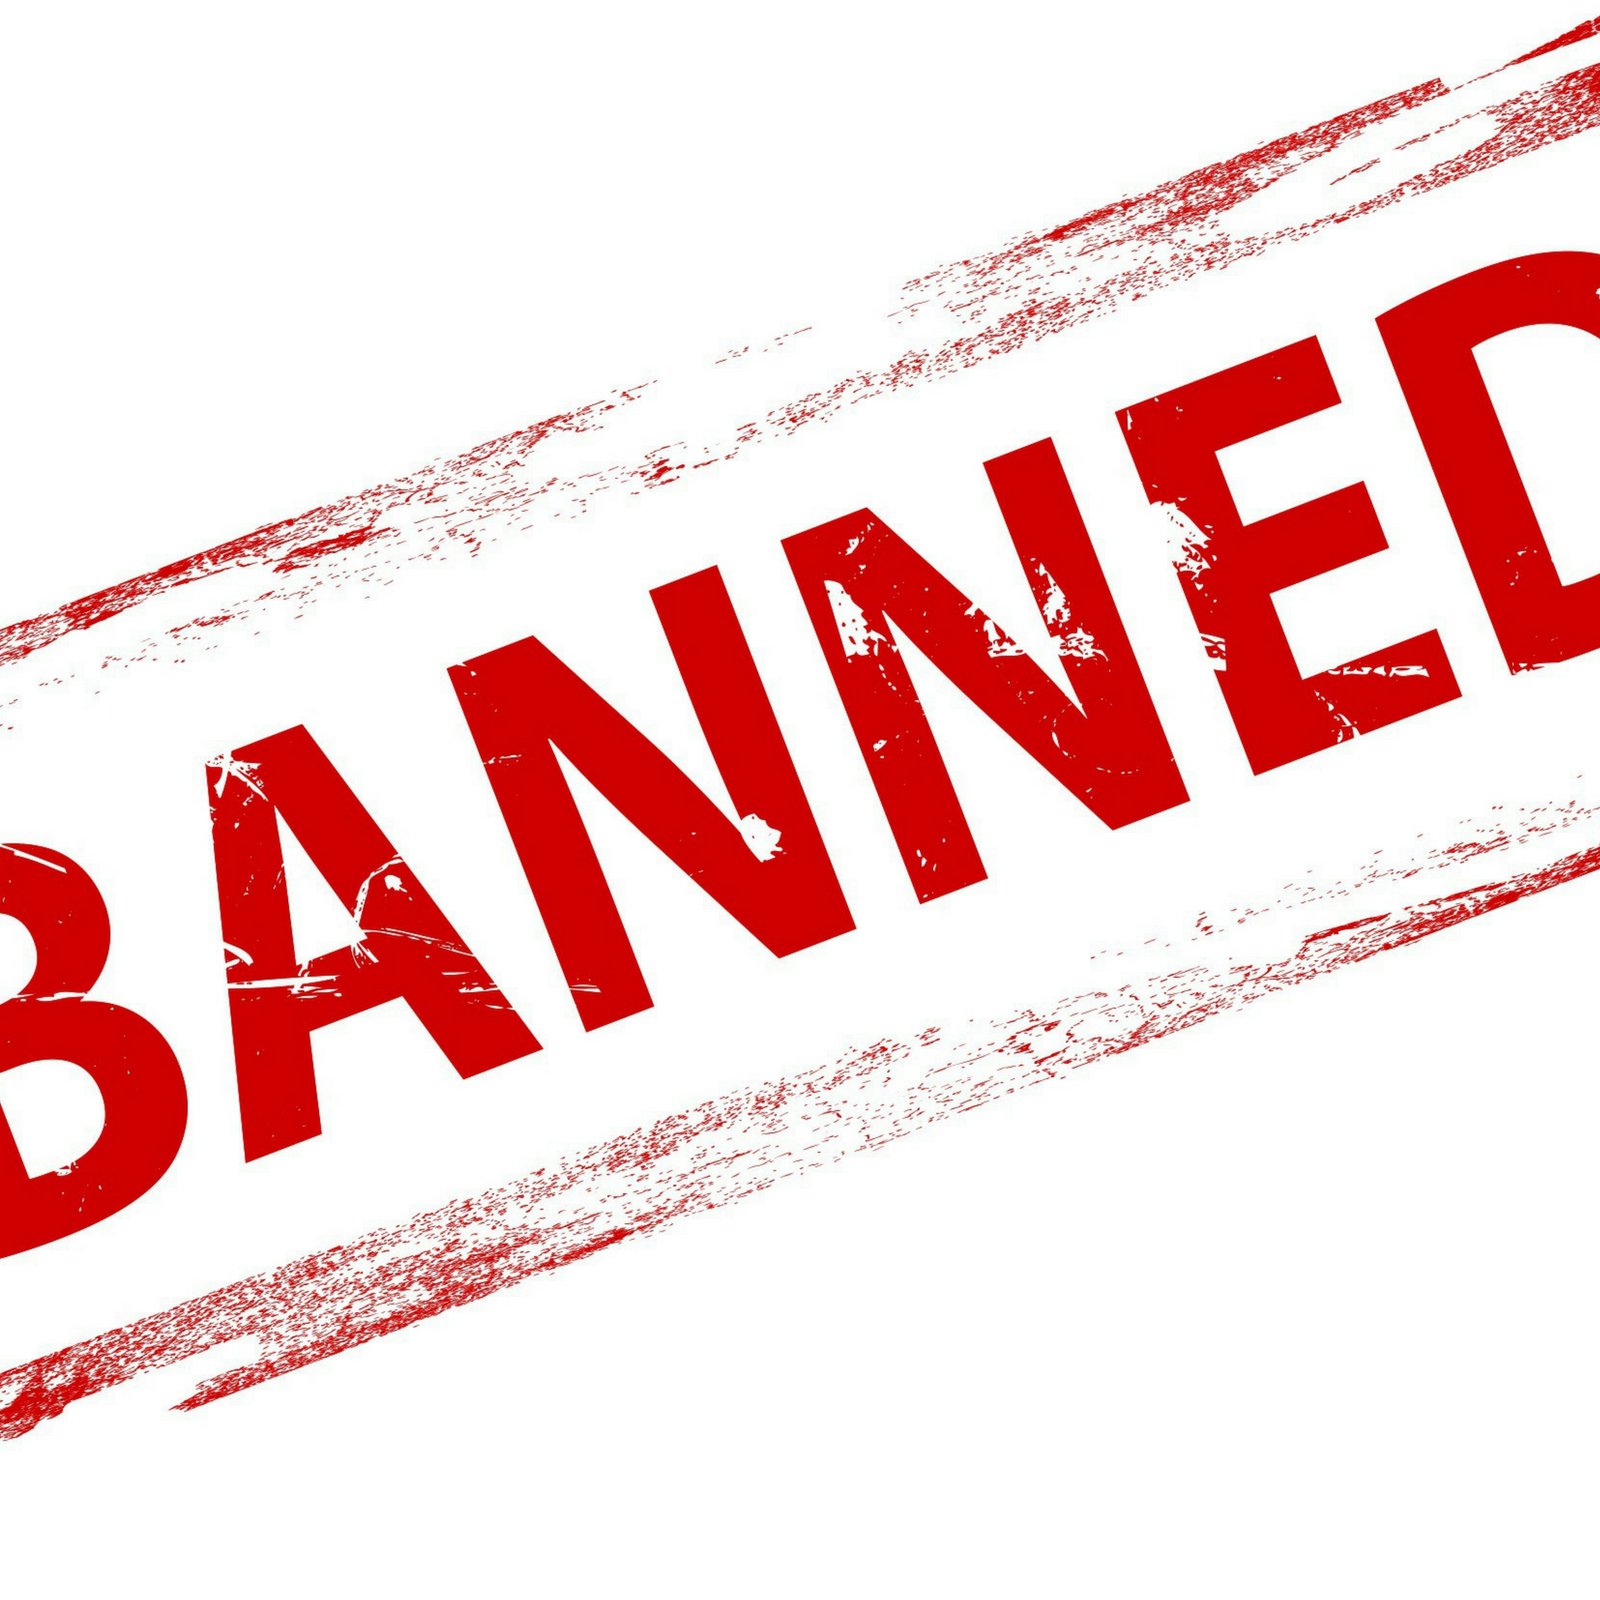 World’s Second Largest Search Engine Bans Crypto Ads